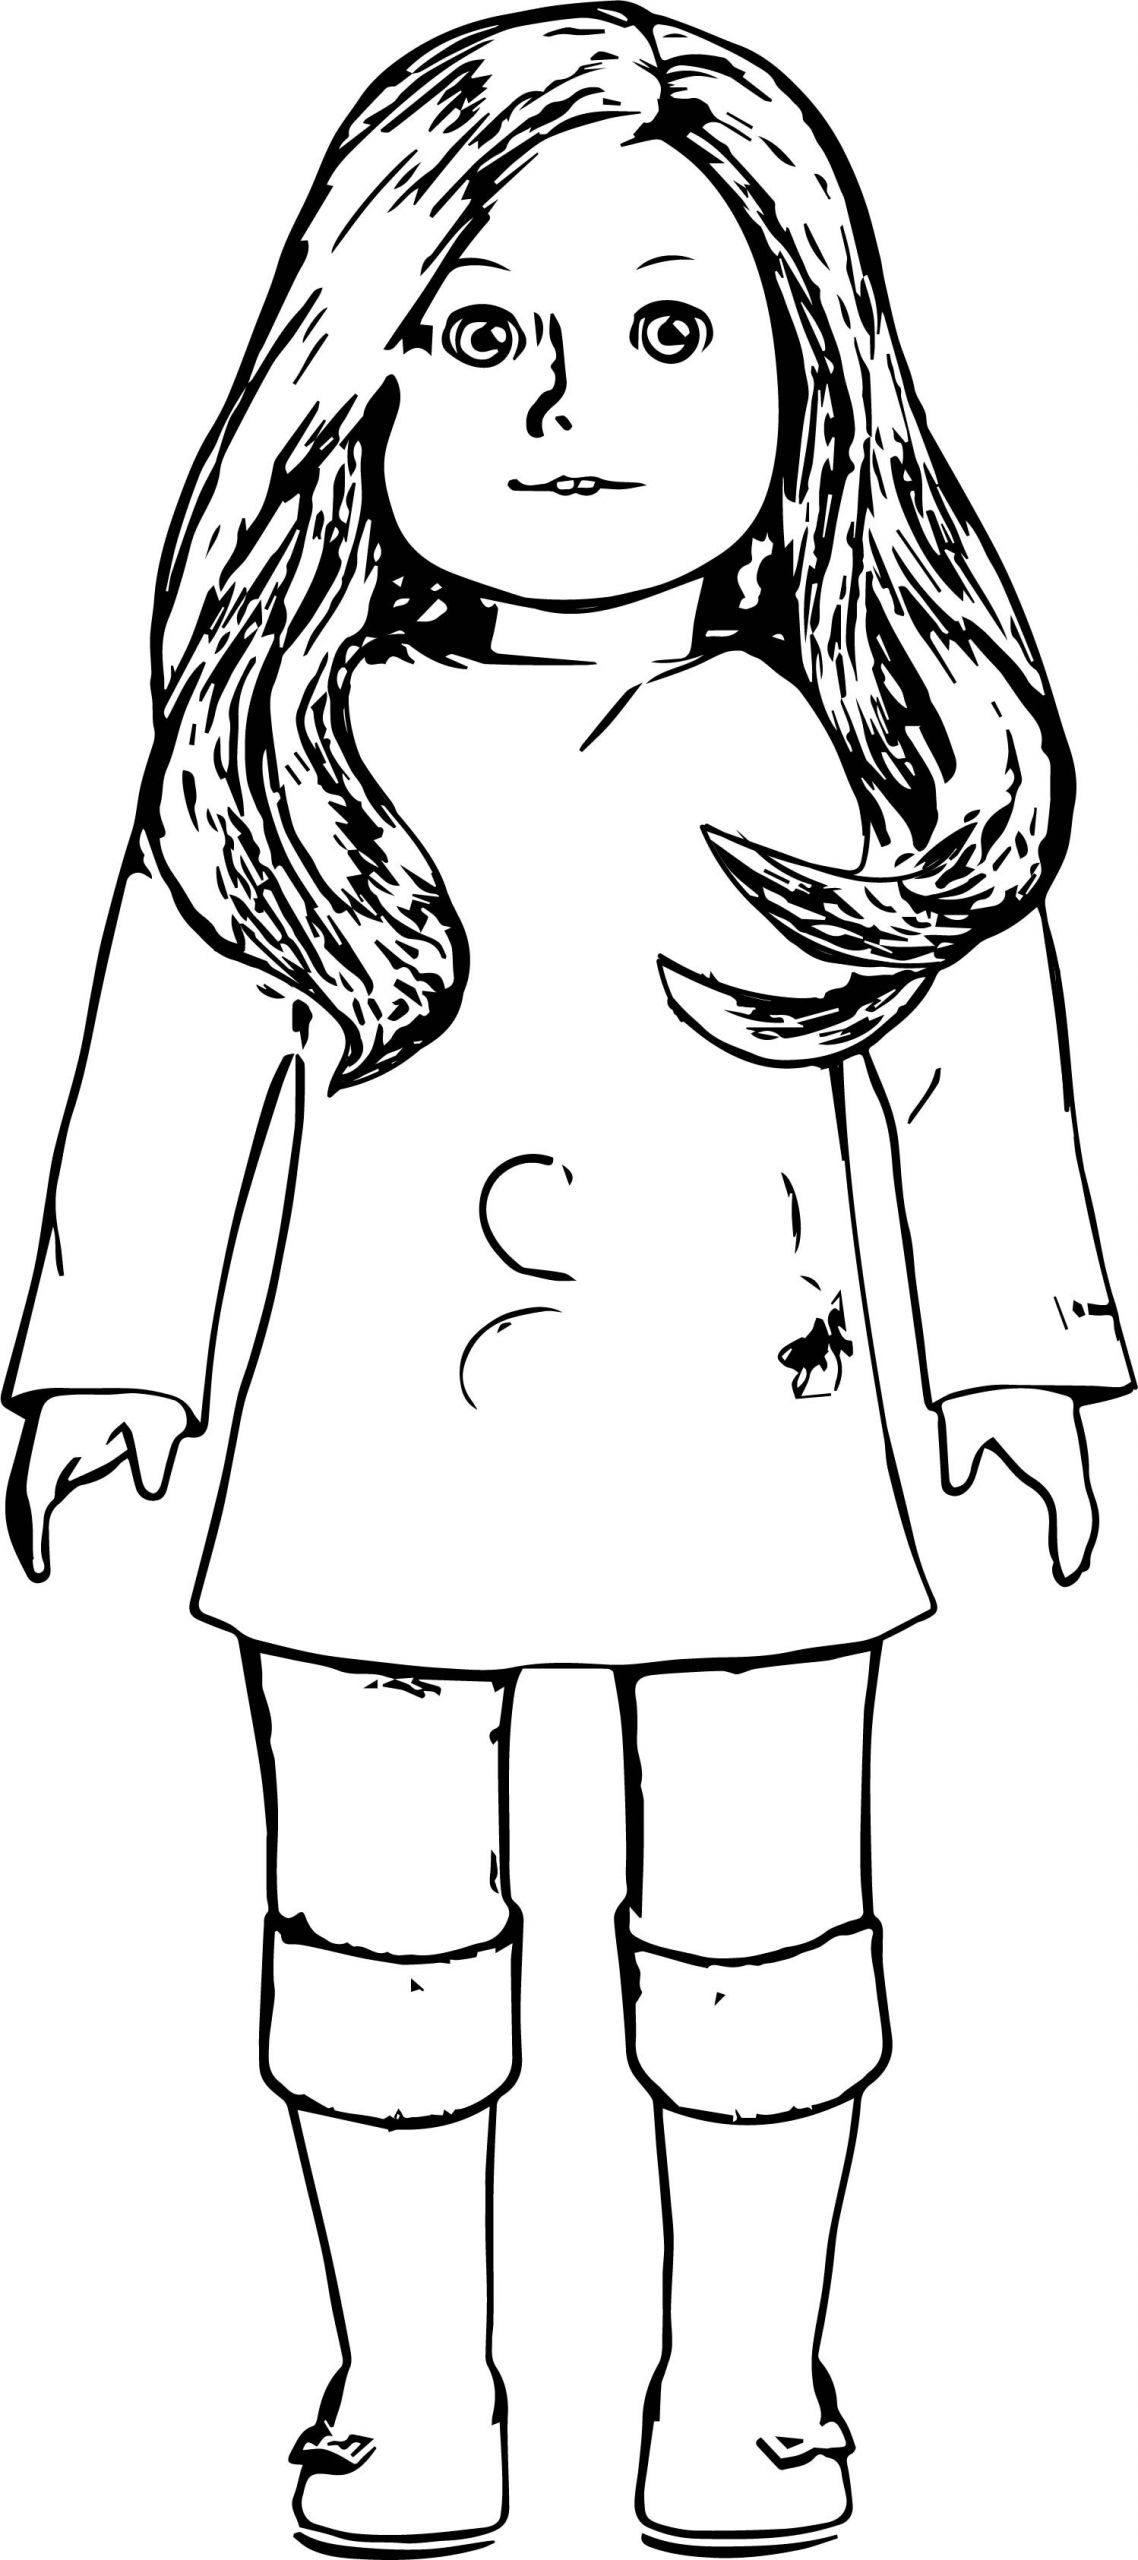 American Girls Coloring Pages
 My American Girl Doll Coloring Page